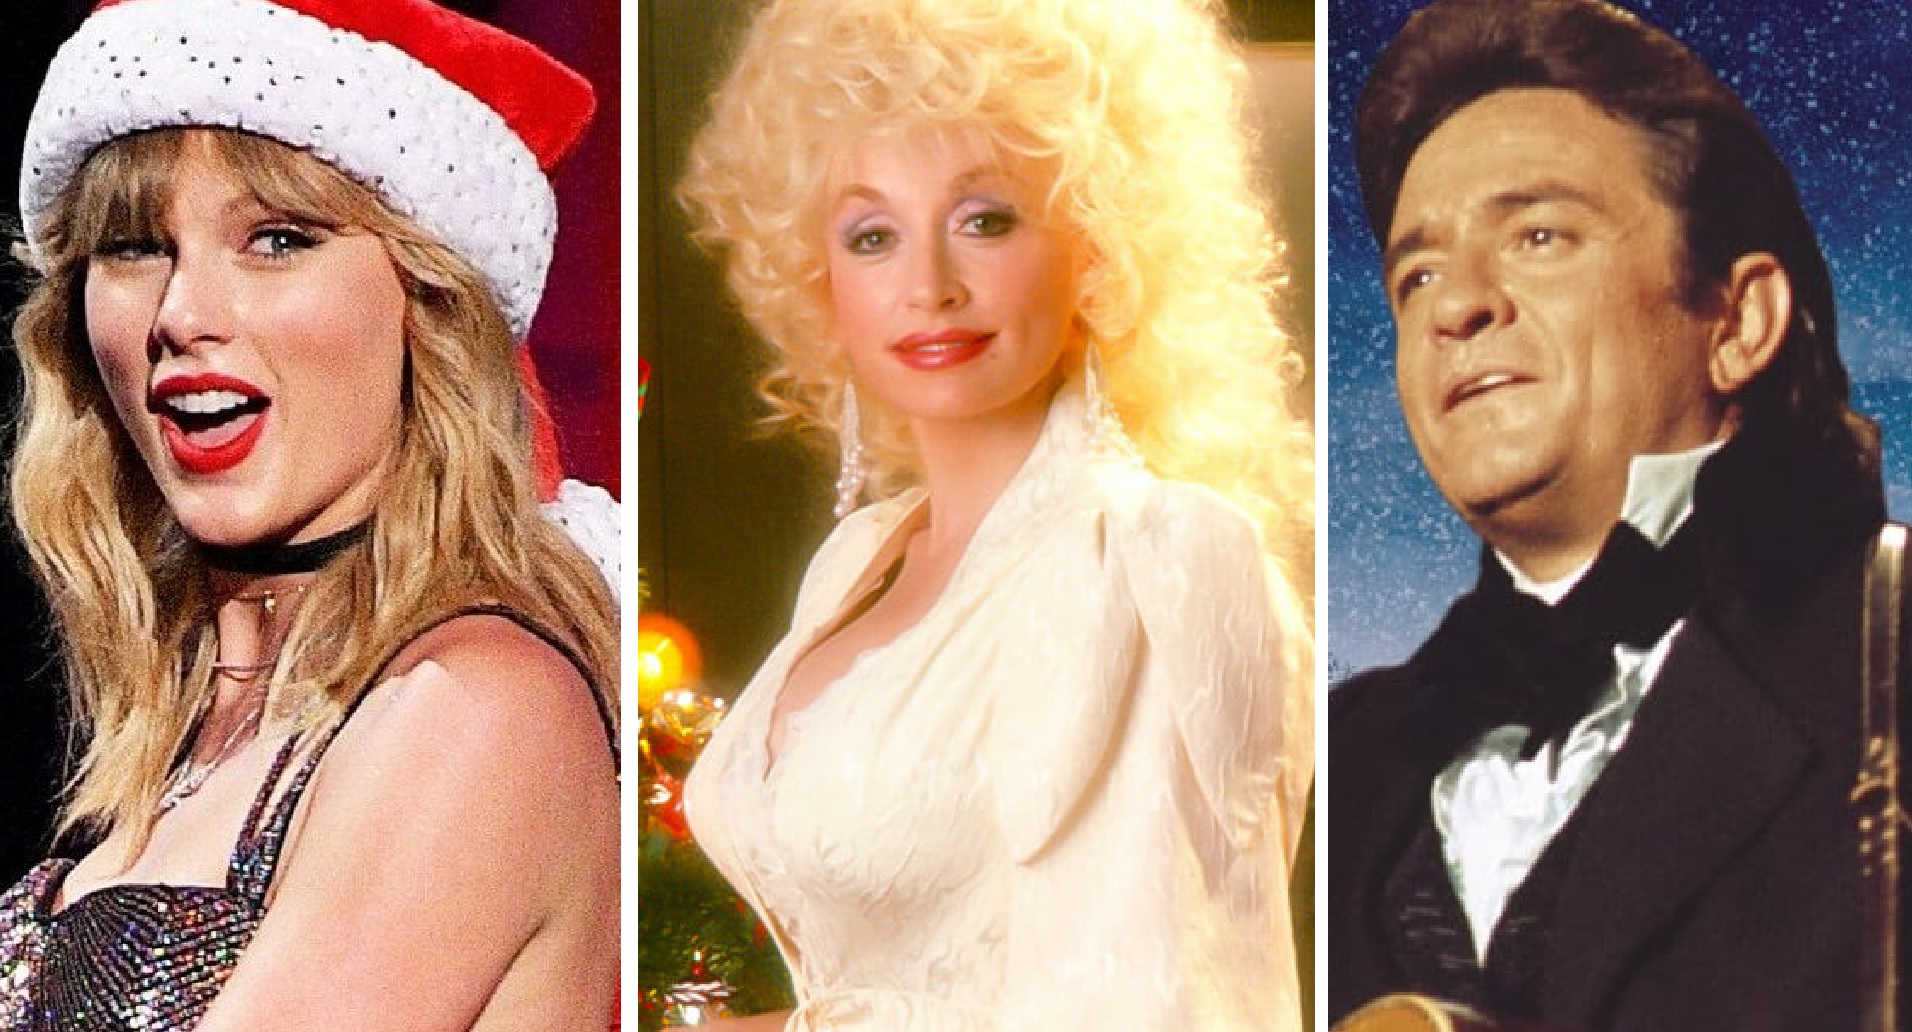 The Top 10 Best Country Christmas Songs That Ought To Be On Your Holiday Playlist